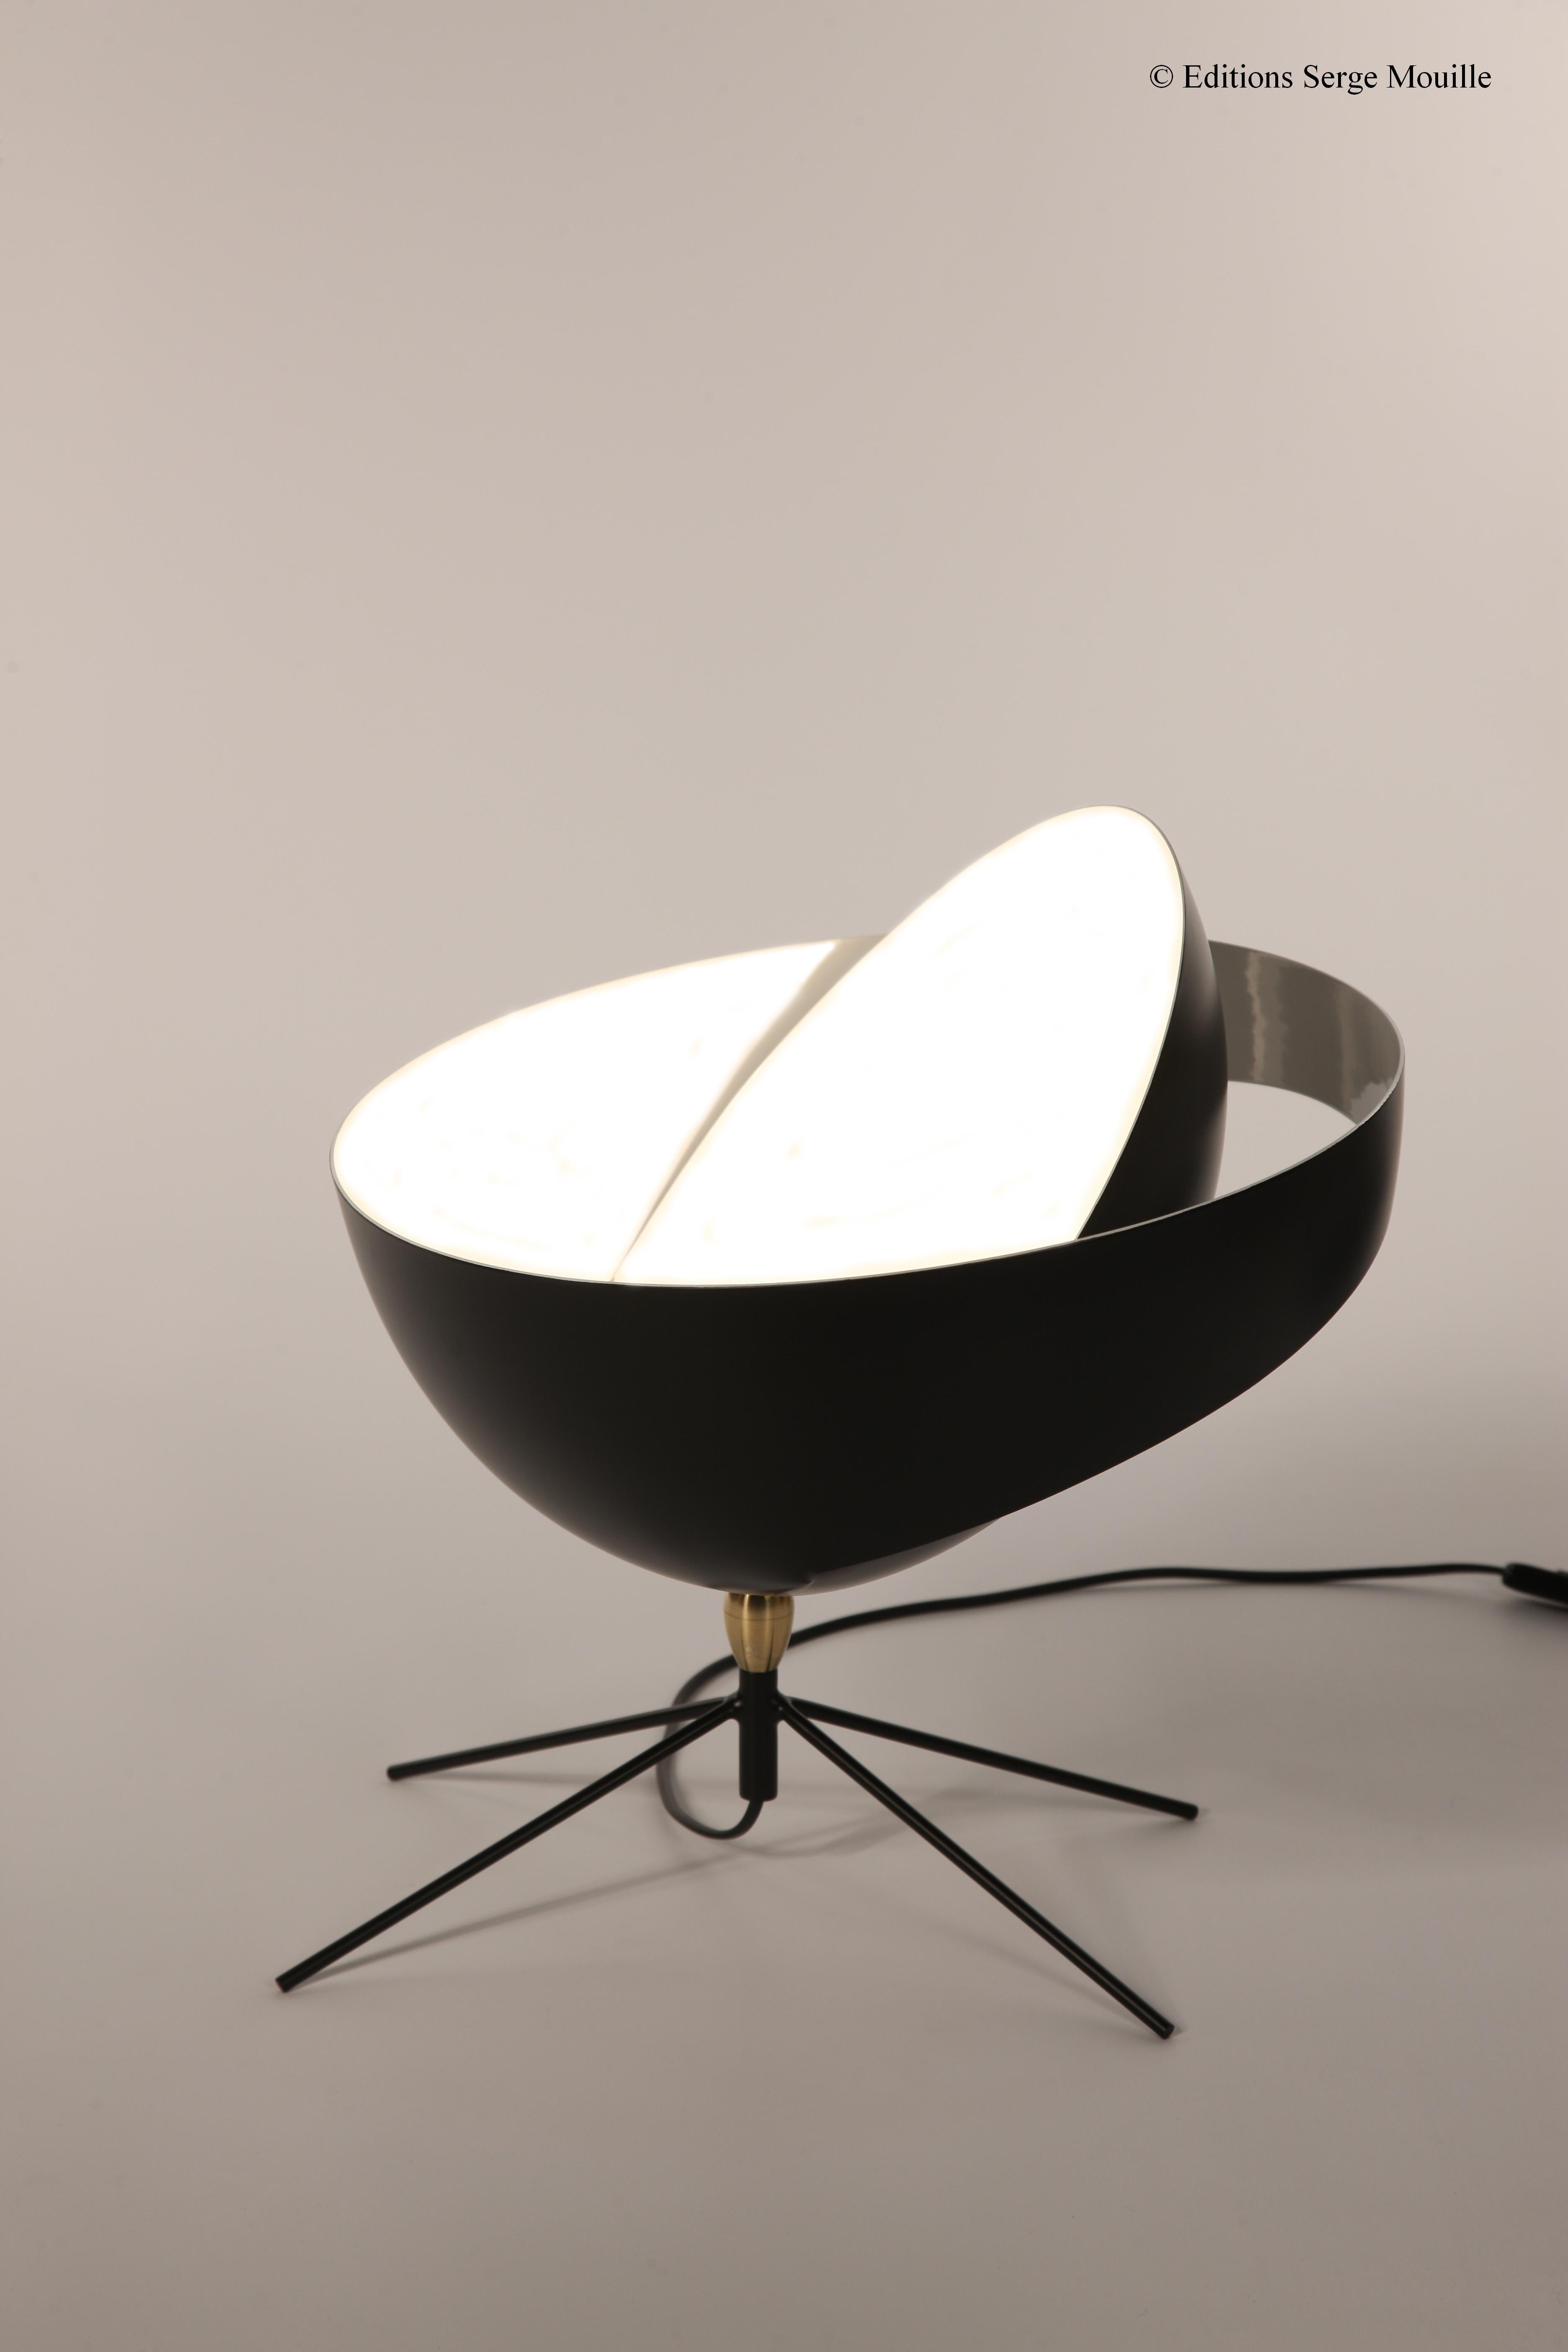 Saturn table lamp by Serge Mouille
Dimensions: D 41 x W 39 x H 40 cm
Materials: Brass, steel, aluminum
One of a King. Numbered.
Also available in different color.

All our lamps can be wired according to each country. If sold to the USA it